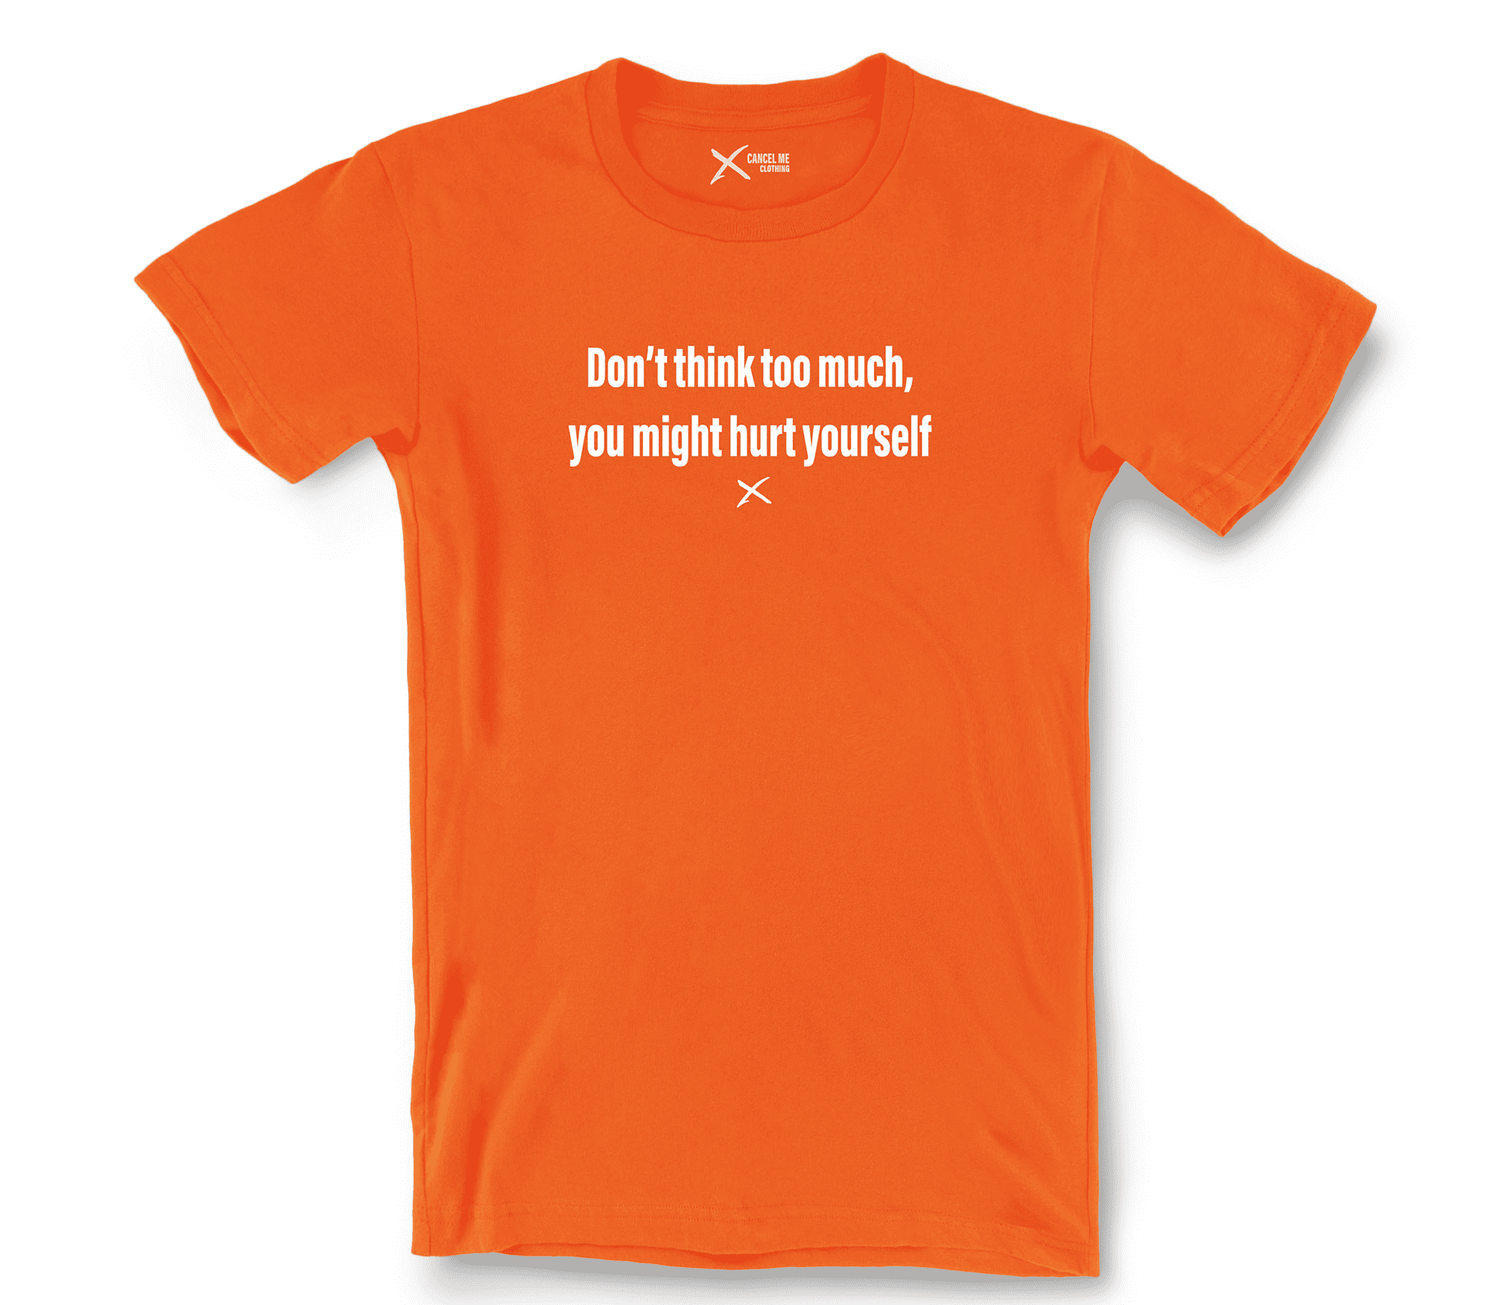 lp-school_1-shirt_7791602499754_dont-think-too-much-you-might-hurt-yourself-shirt_Orange.png